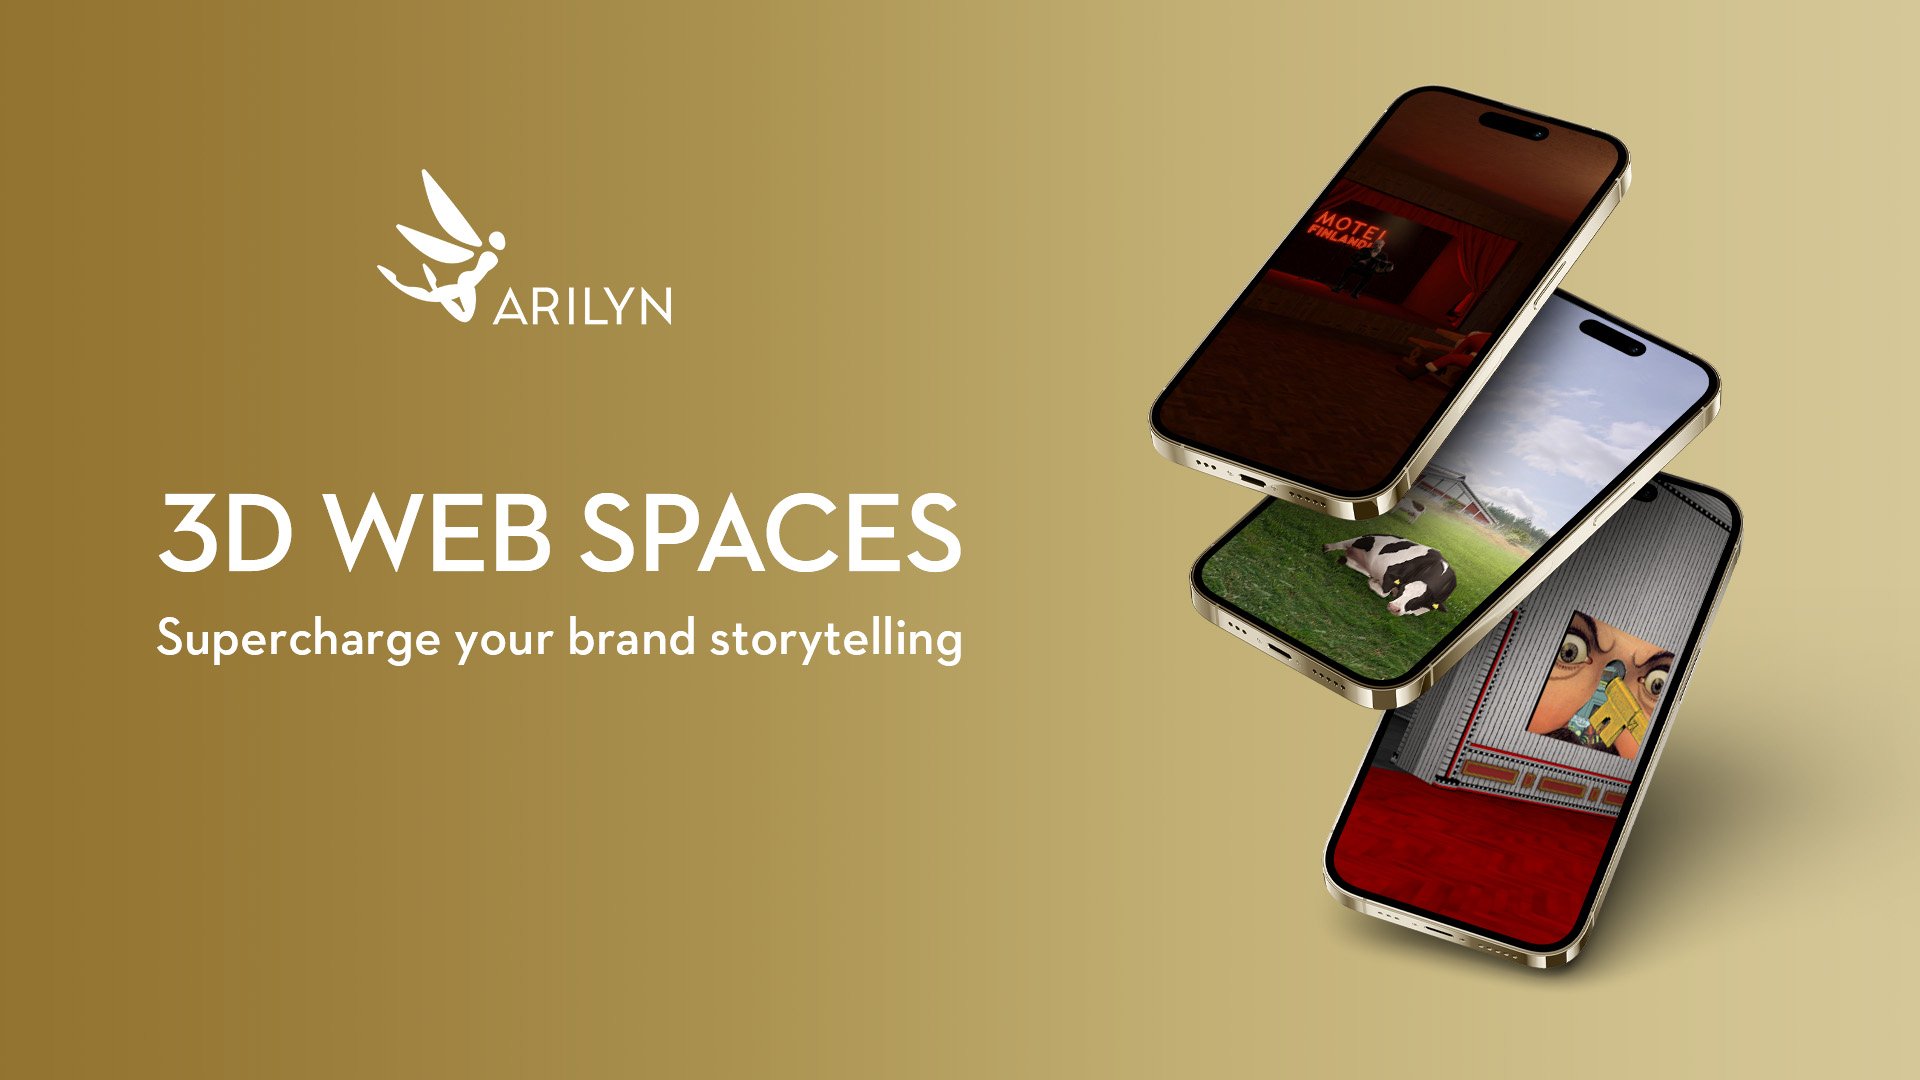 3D online spaces supercharge your brand storytelling